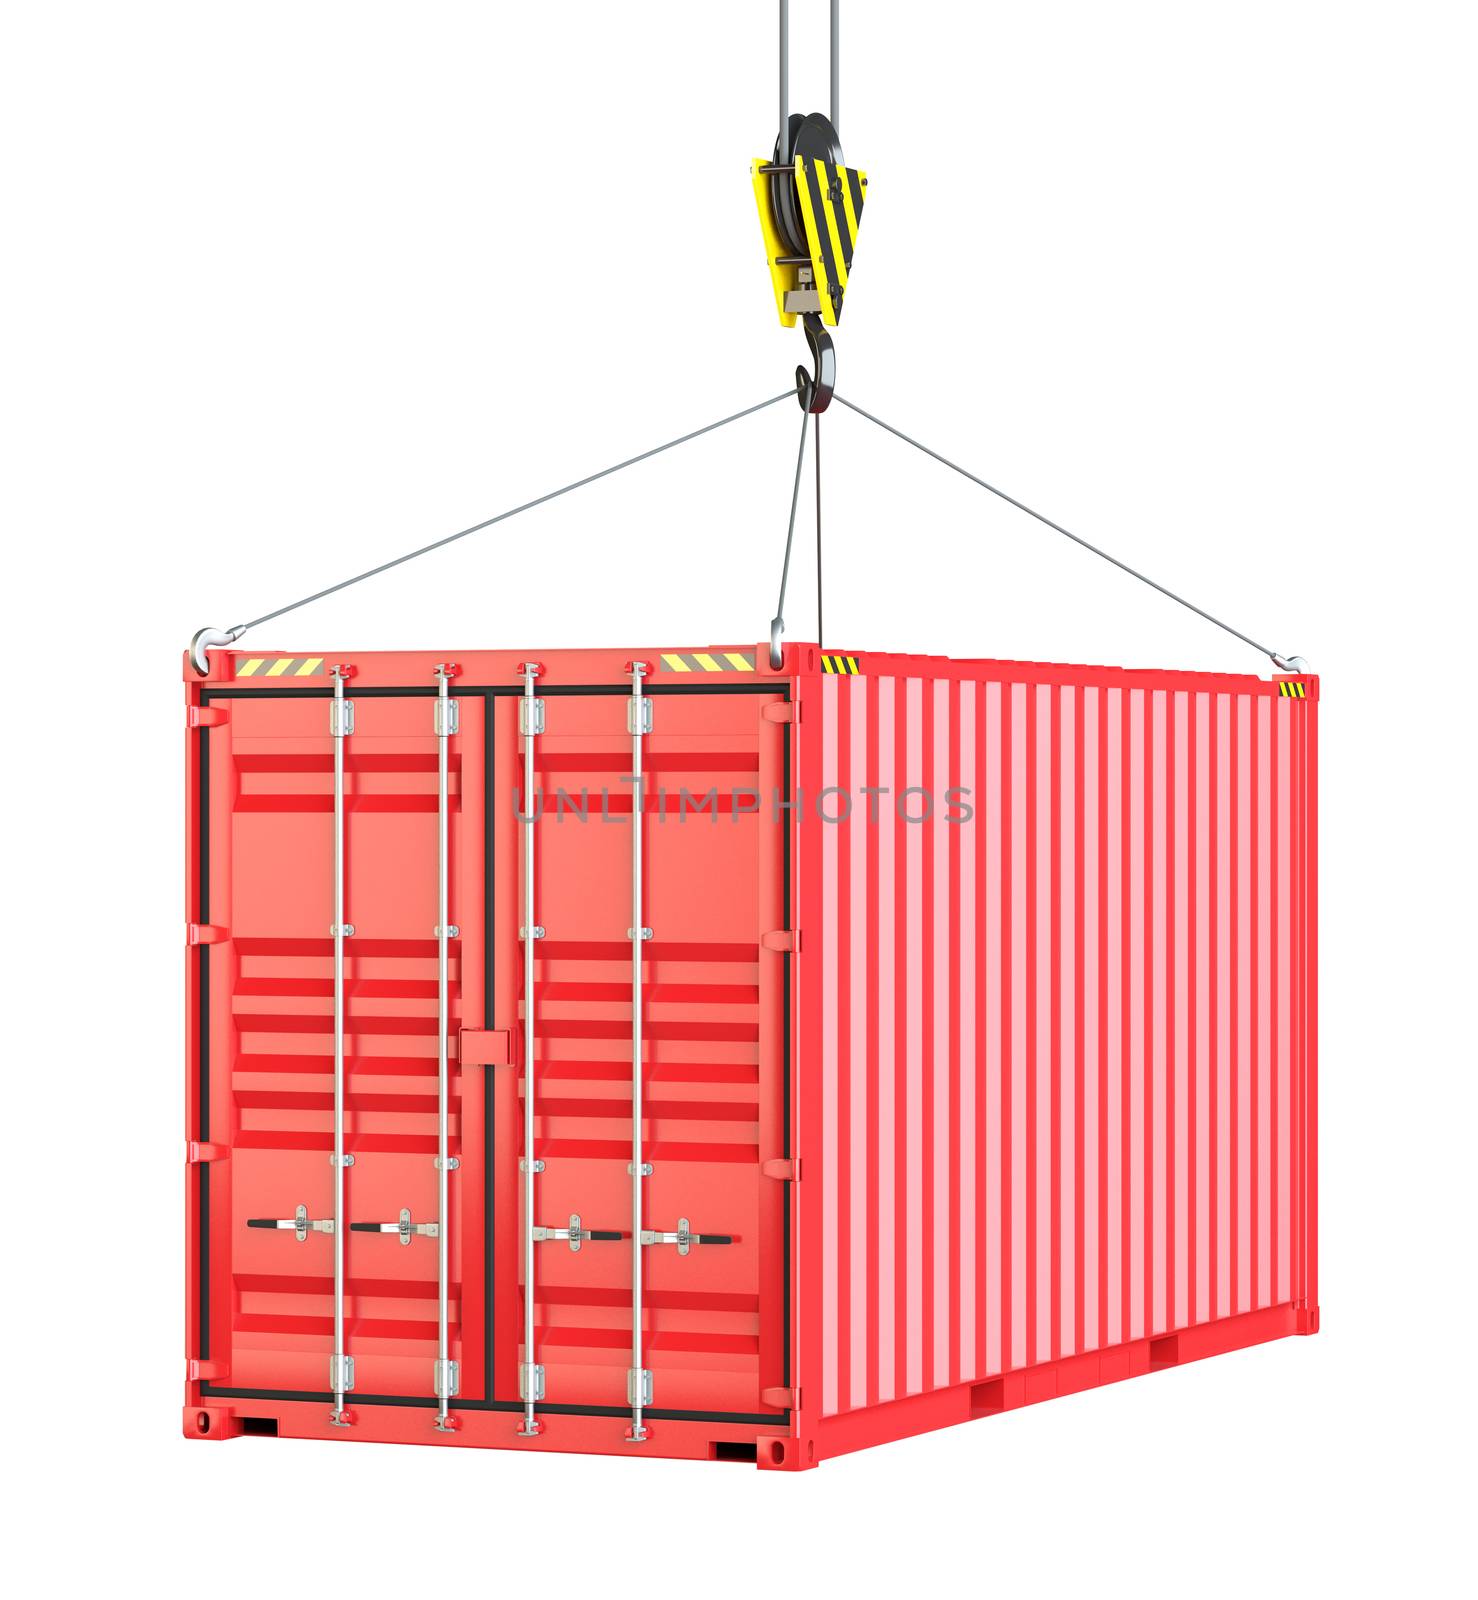 Crane hook and red cargo container. Isolated on white background. 3D rendering